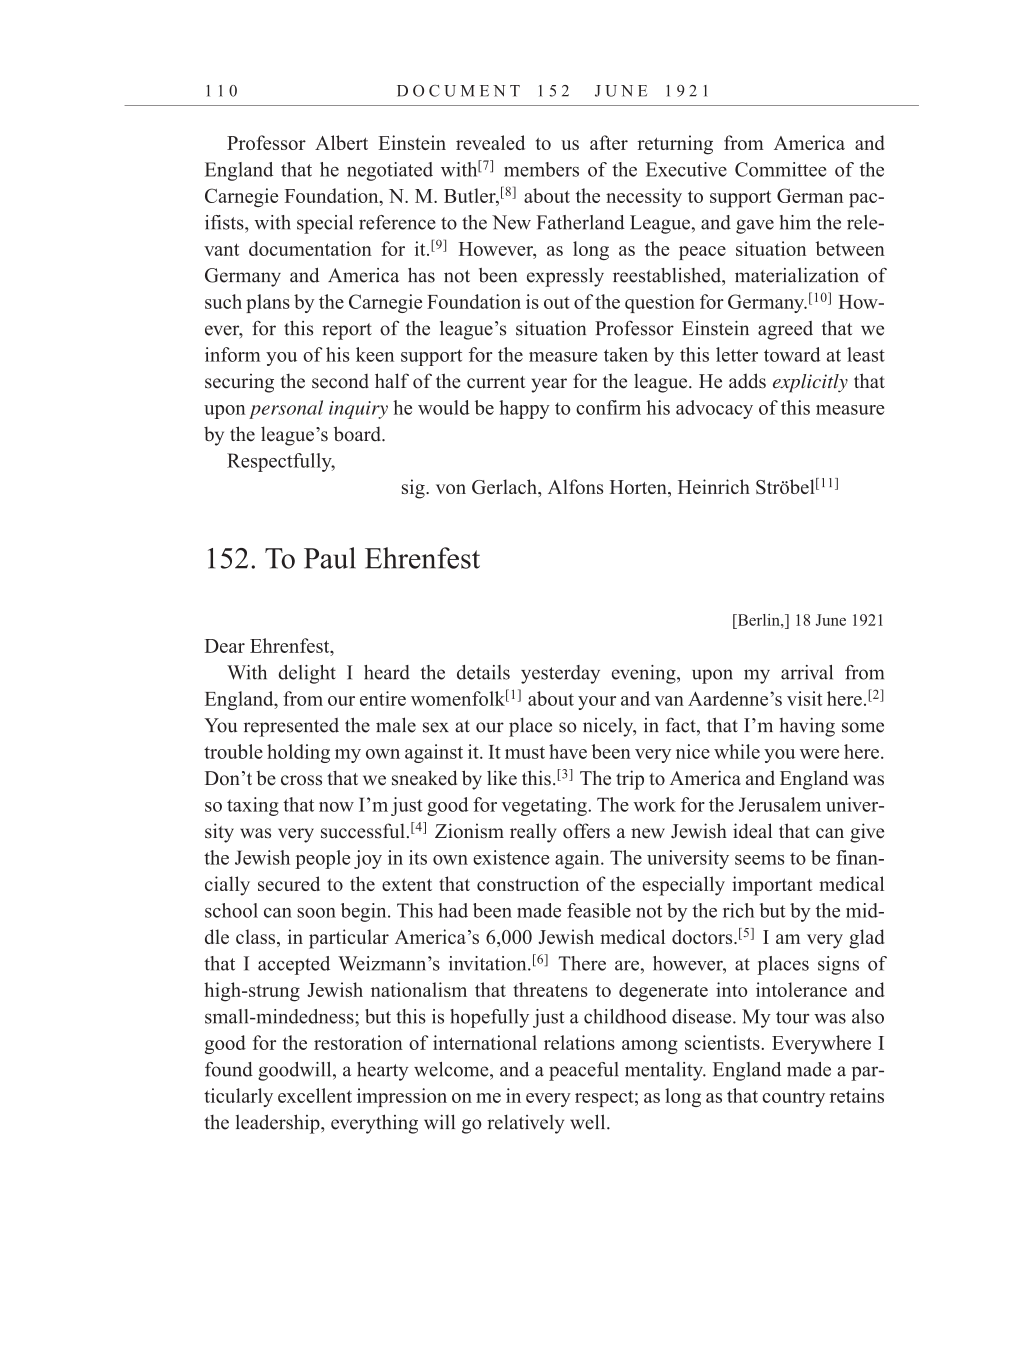 Volume 12: The Berlin Years: Correspondence, January-December 1921 (English translation supplement) page 110